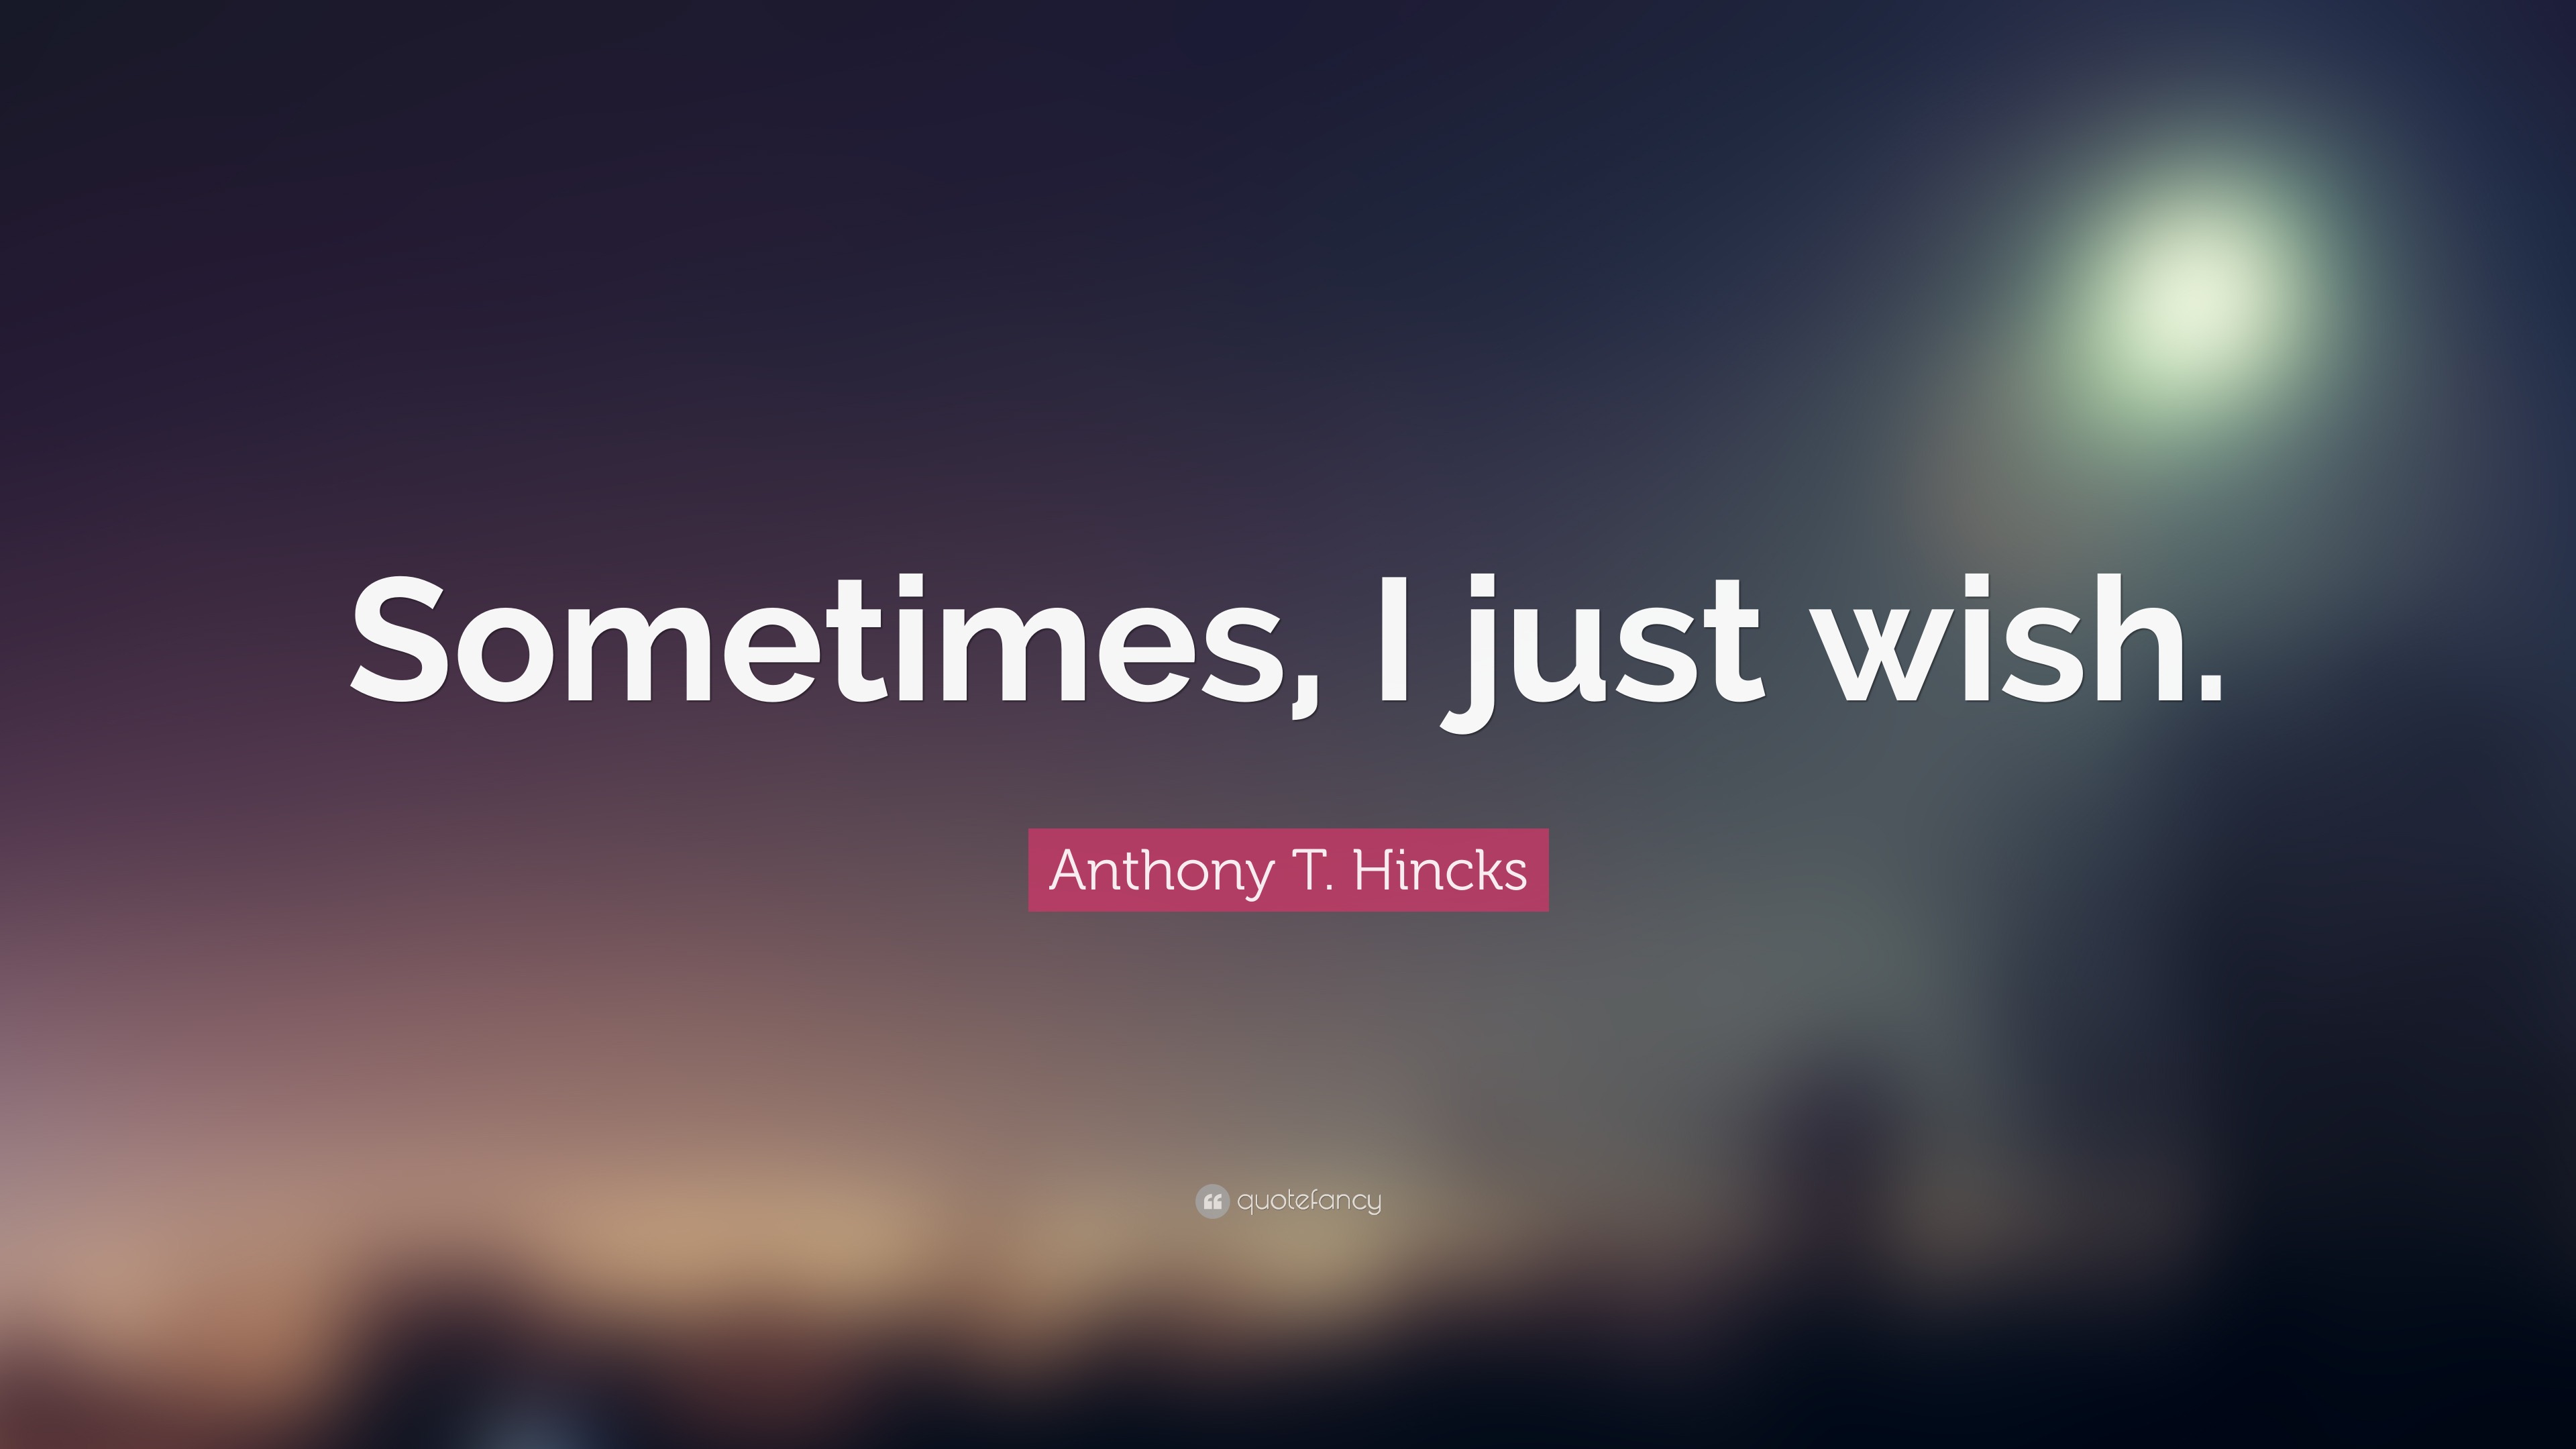 Anthony T Hincks Quote “sometimes I Just Wish”